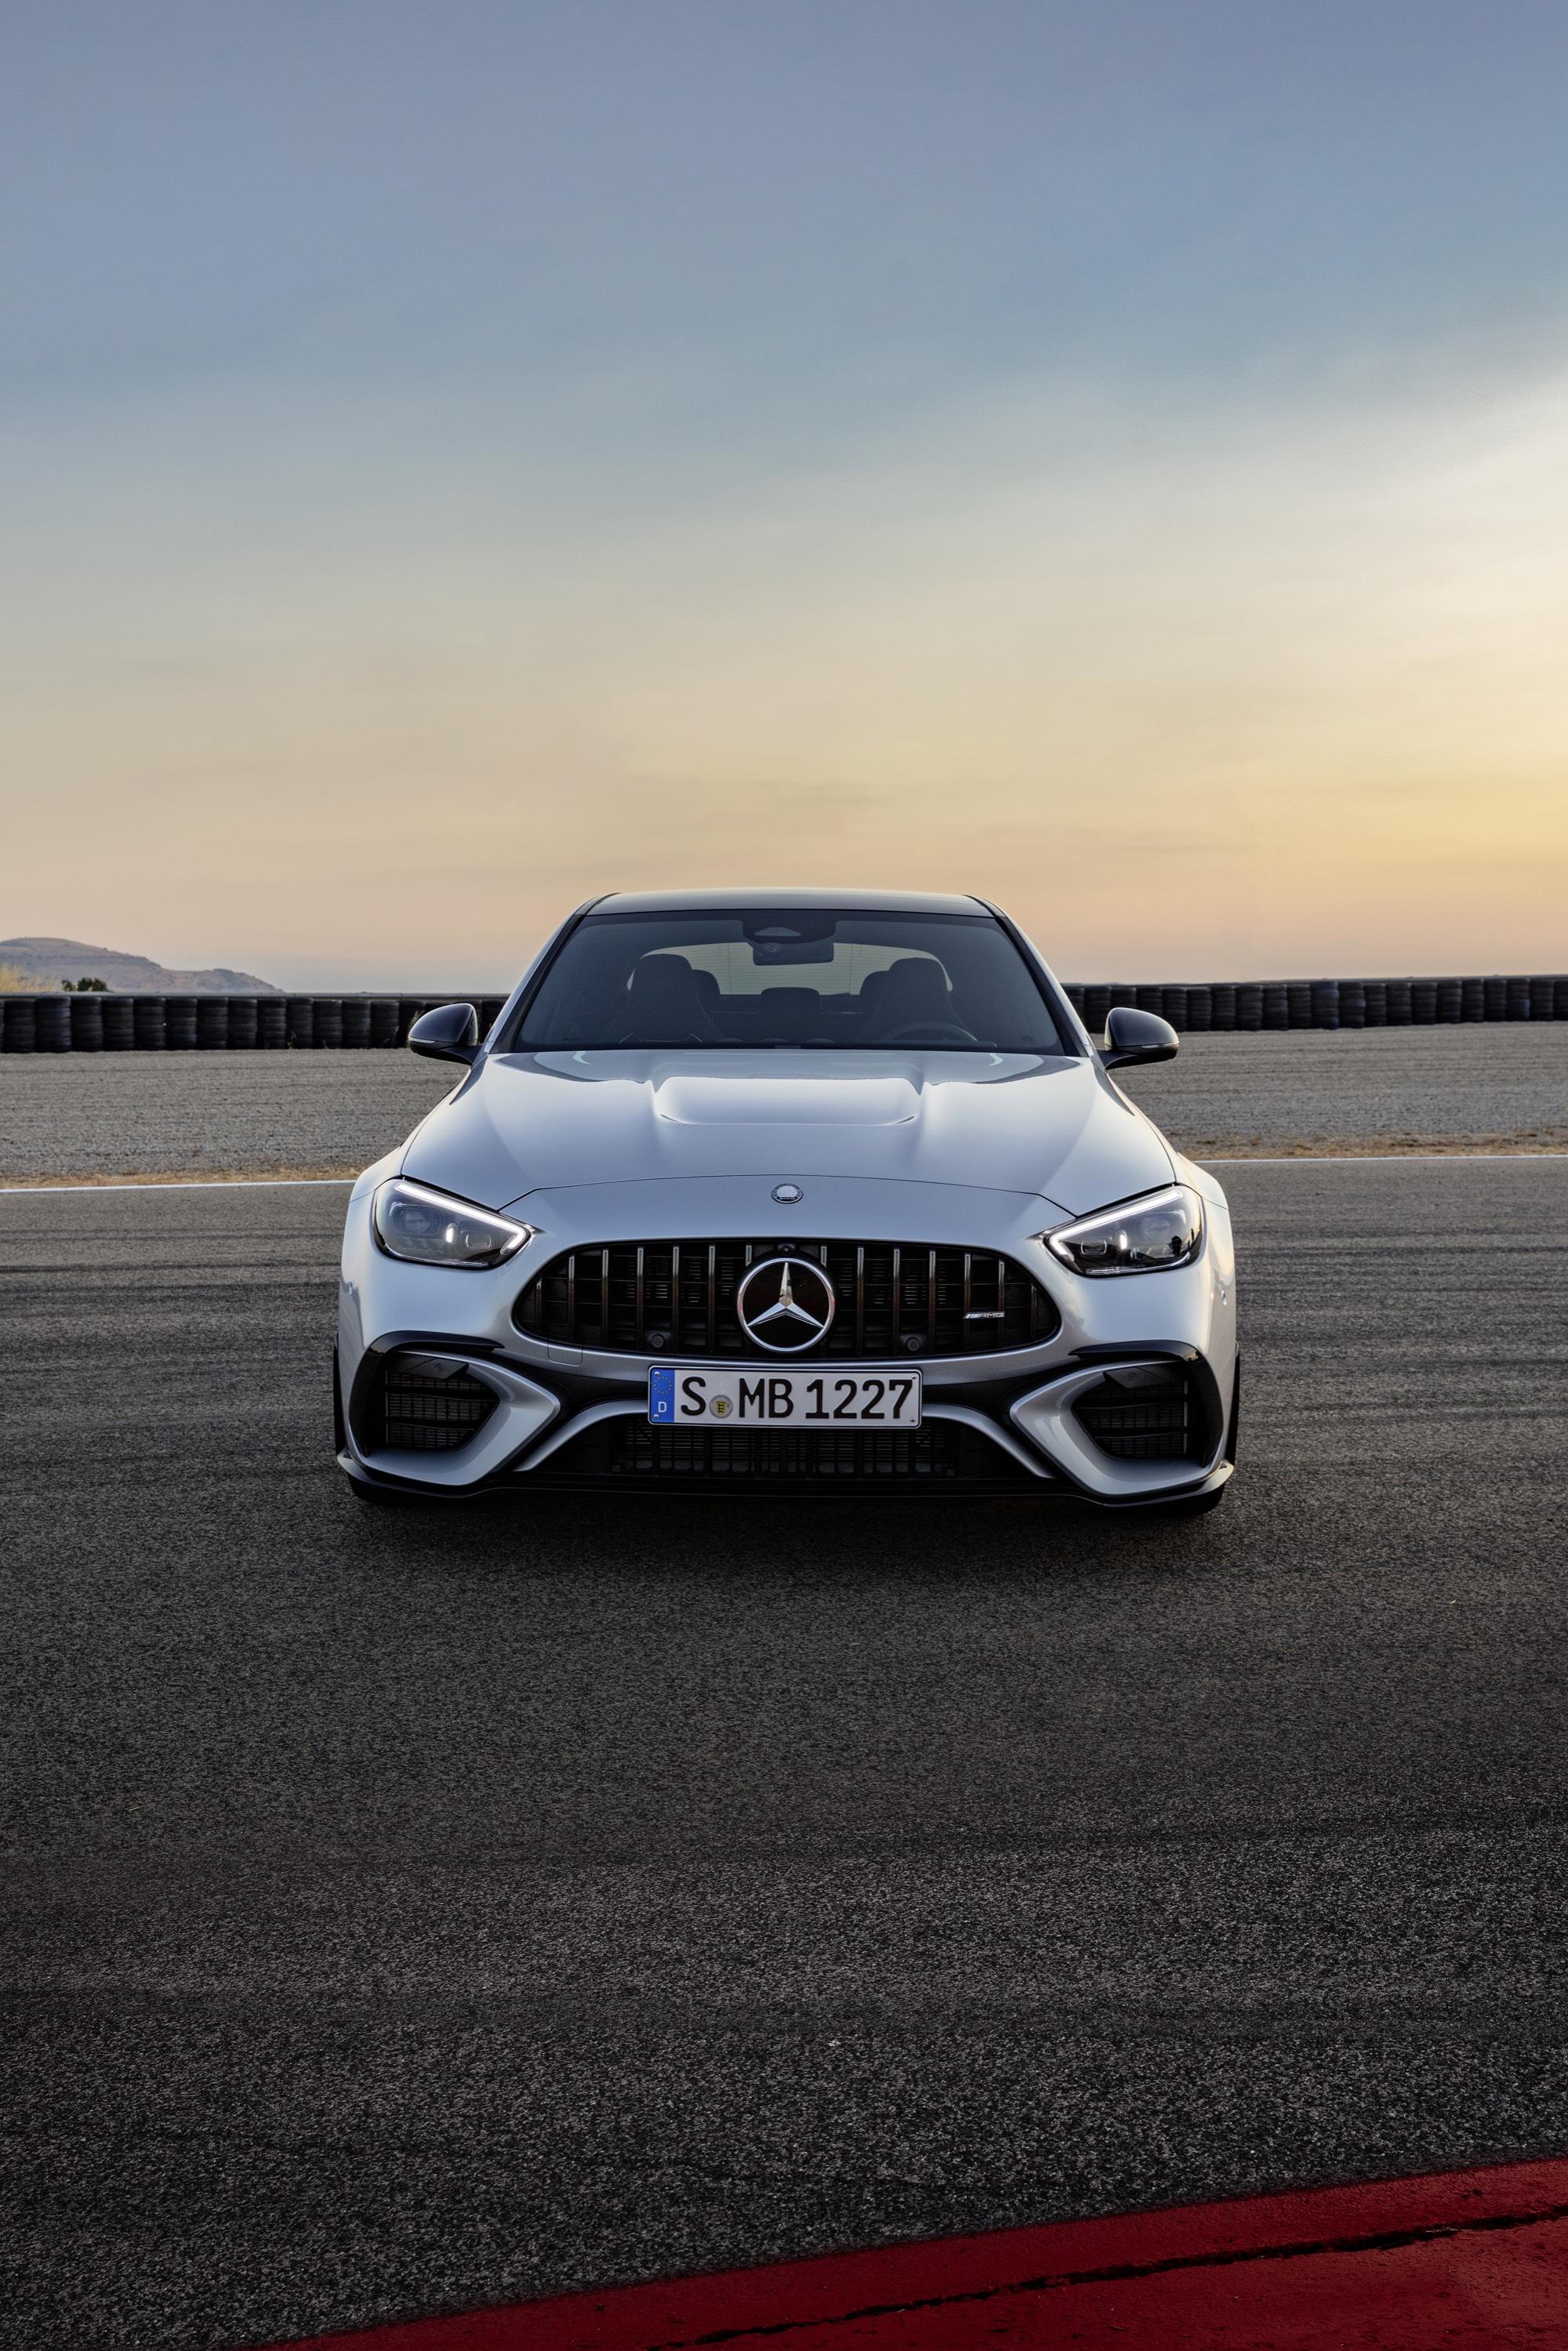 Mercedes Benz C63 S Amg E Performance Picture Of